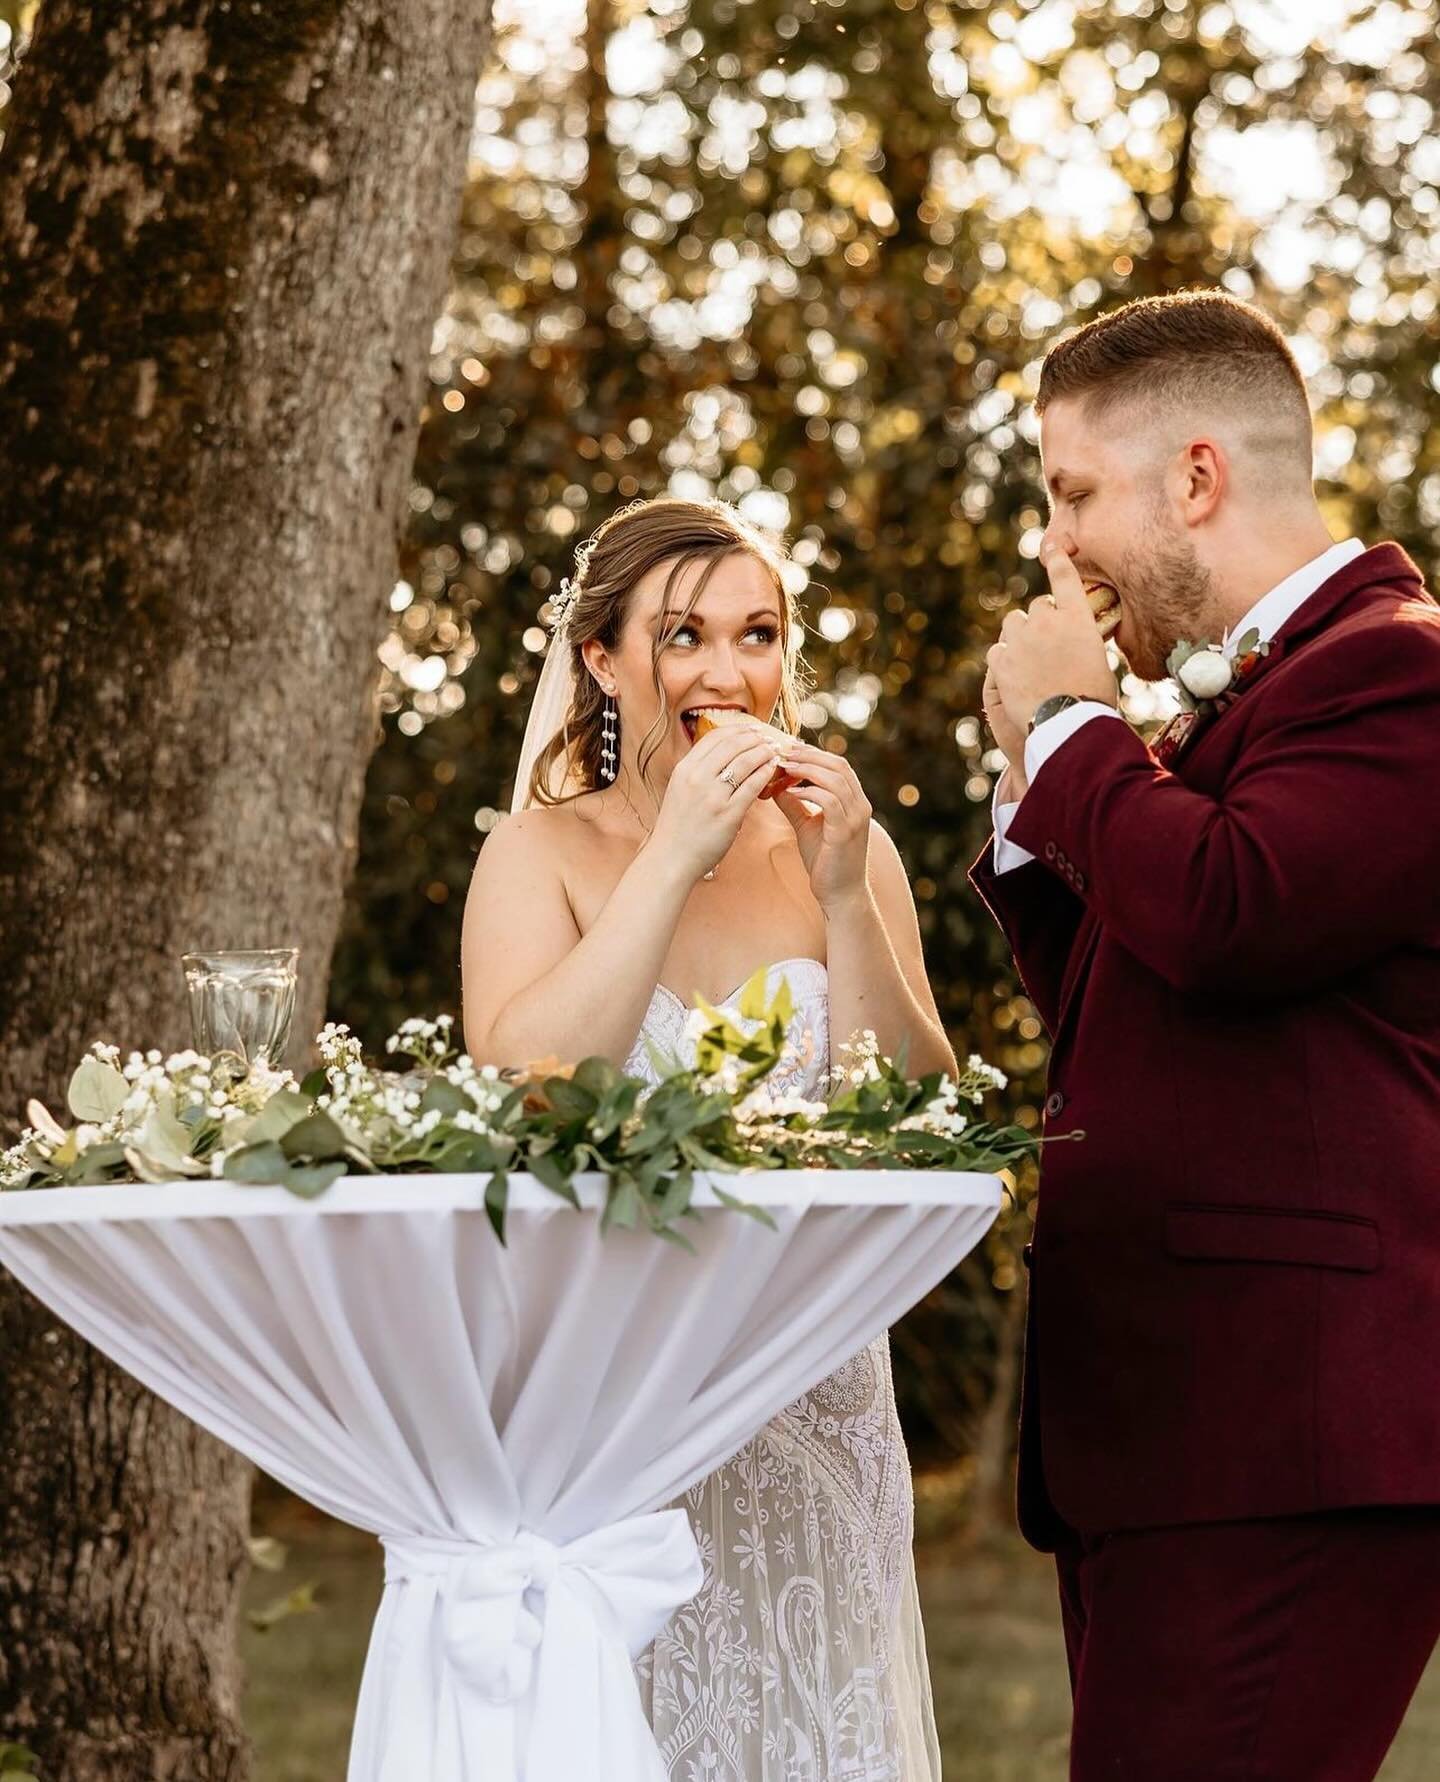 We are here 👏🏼 for 👏🏼 all the personal touches and sentimental moments on your big day.

This couple decided to make PB&amp;J sandwiches as their unity ceremony, and it truly was a moment no one will ever forget!

Think about little details of yo